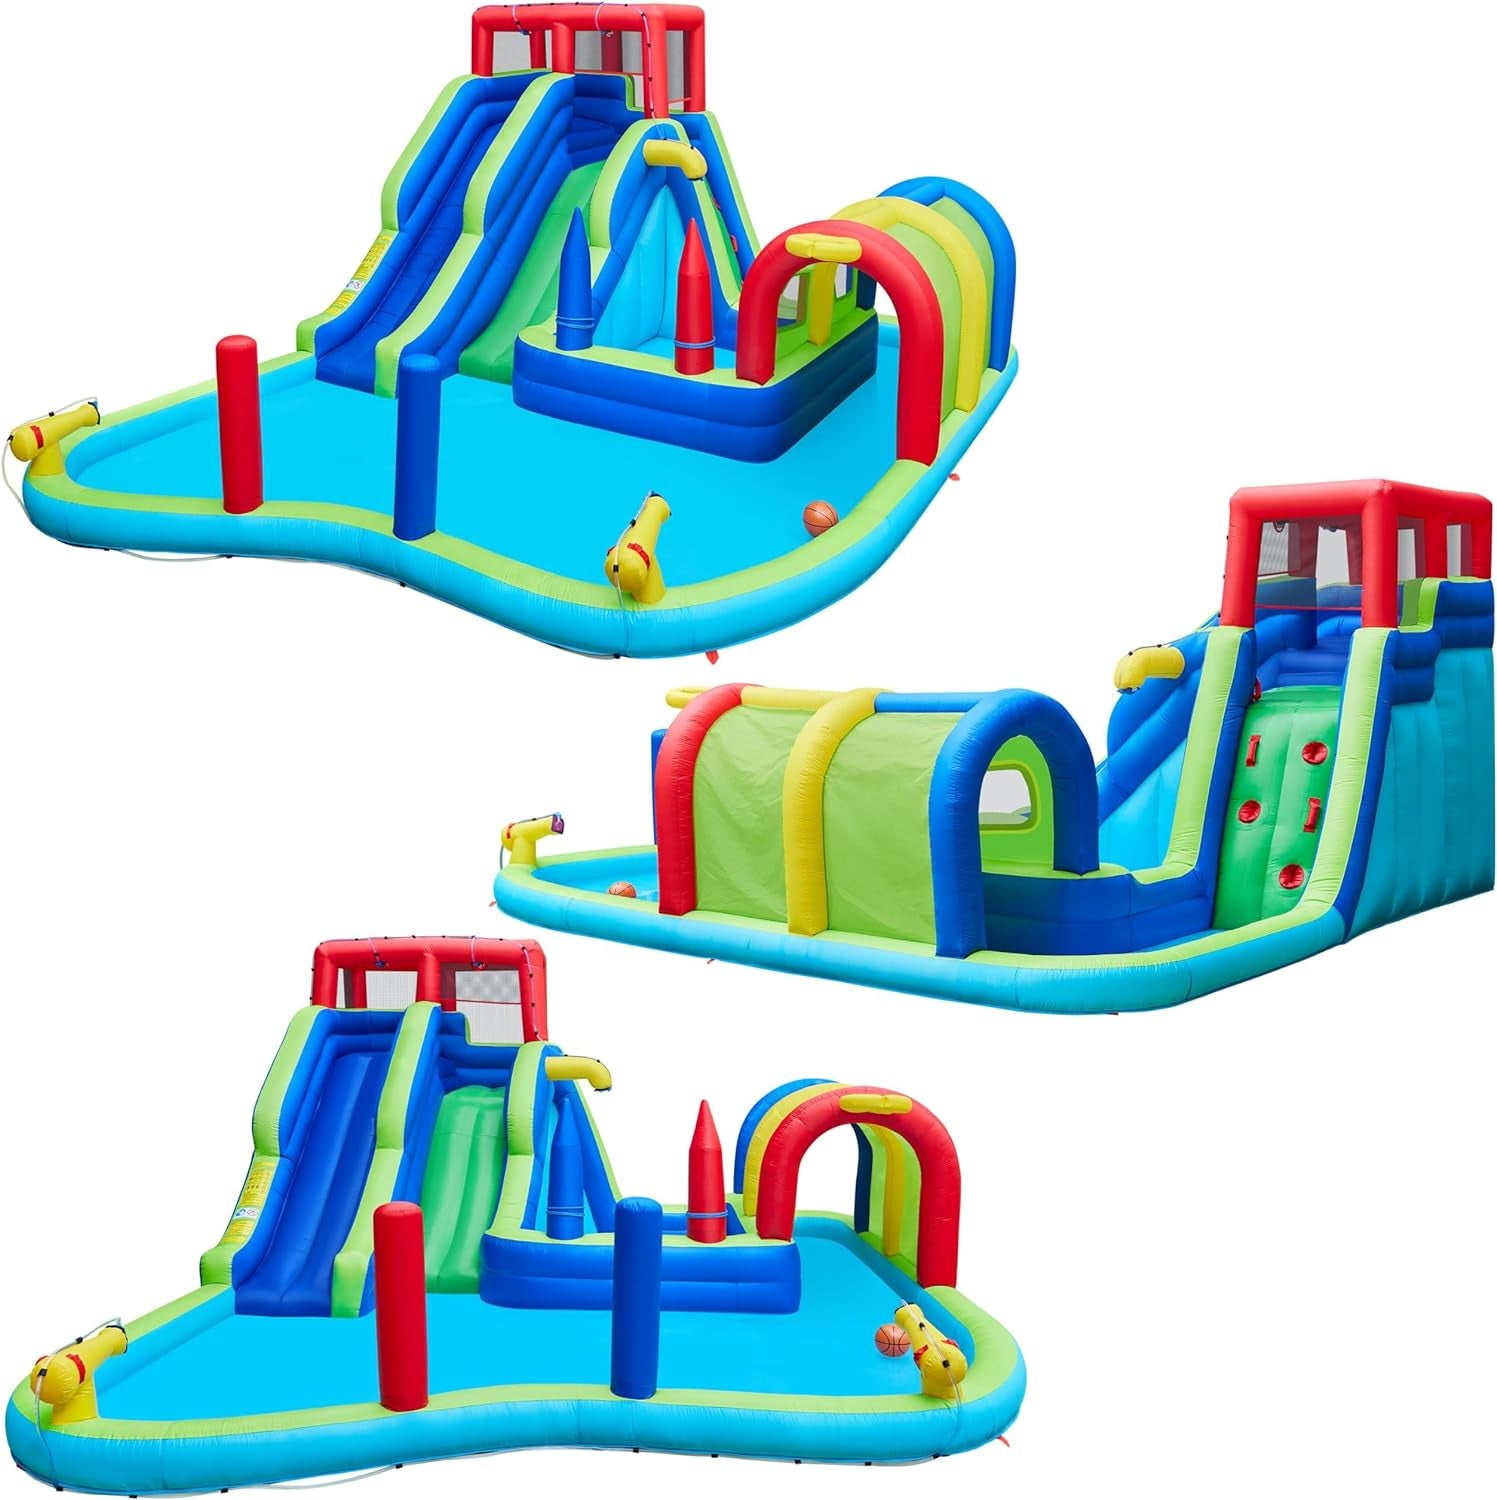 Inflatable Water Slide, Double Lane Water Slide Combo W/Long Tunnel & Climbing Wall & Punching Bags & Ring Toss Game, Kids Inflatable Water Park W/Storage Bag & 650W Blower